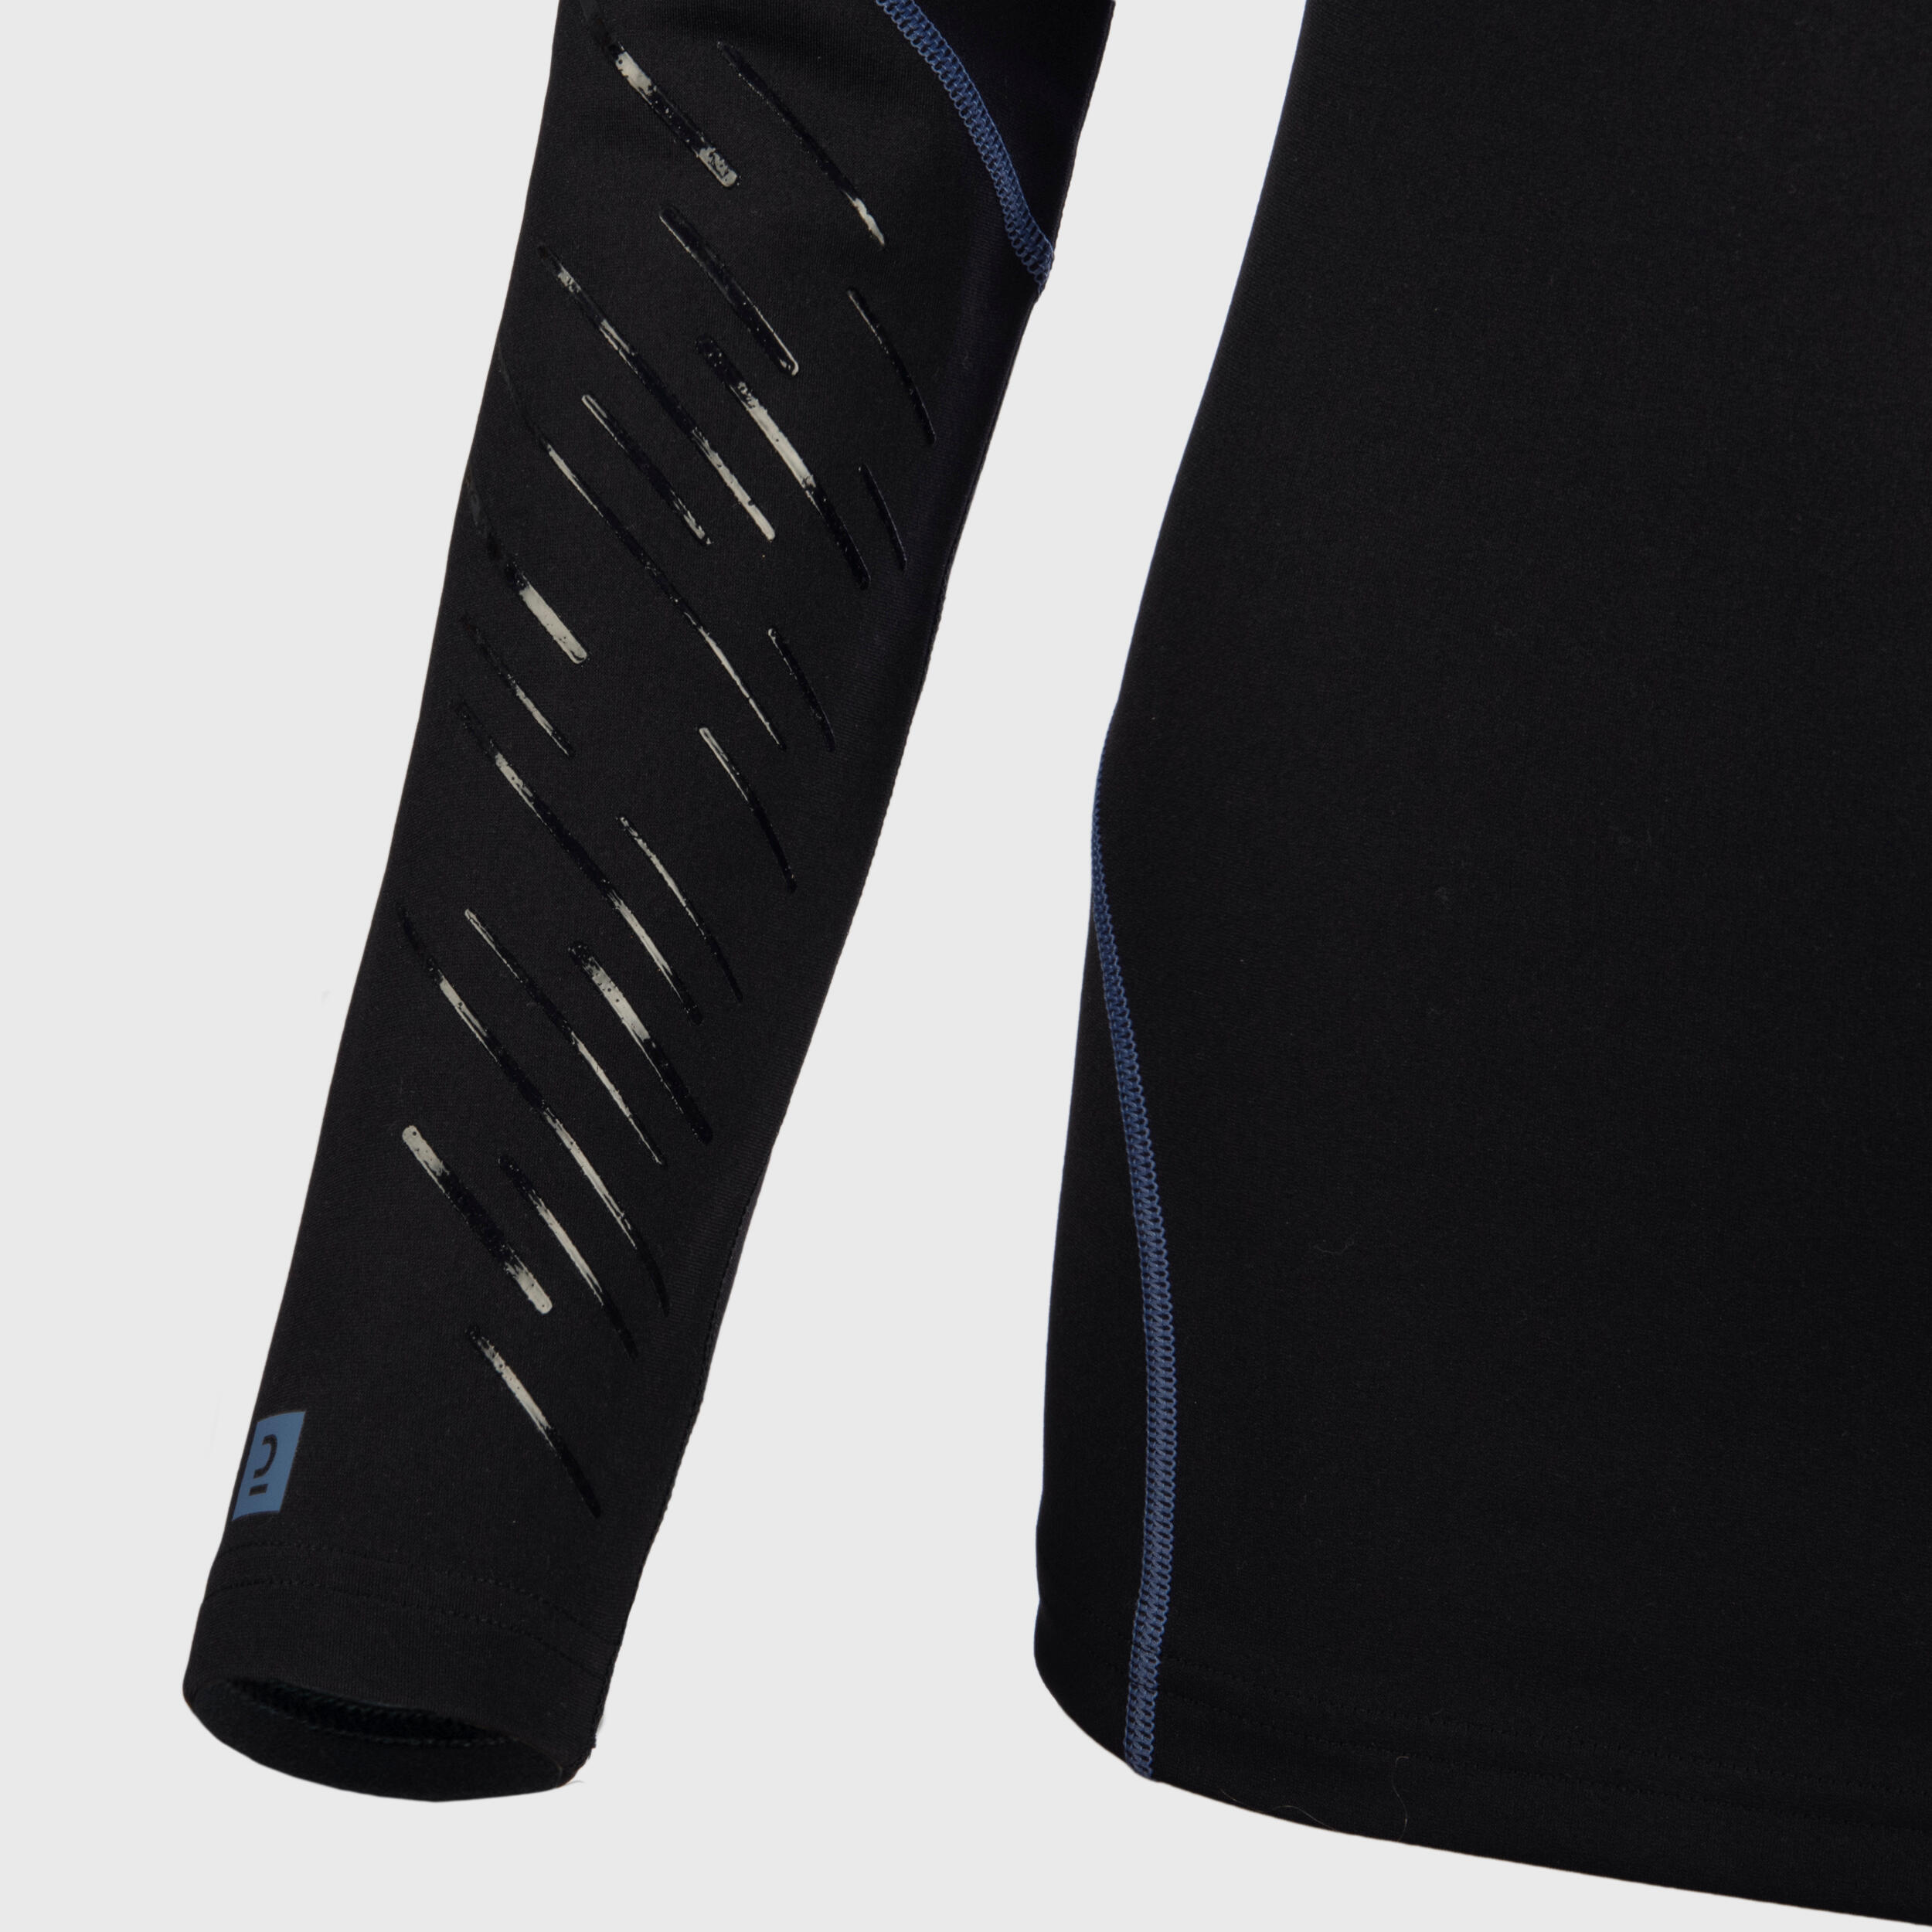 Women's Long-Sleeved Rugby Base Layer 500 - Black/Stormy Blue 4/4